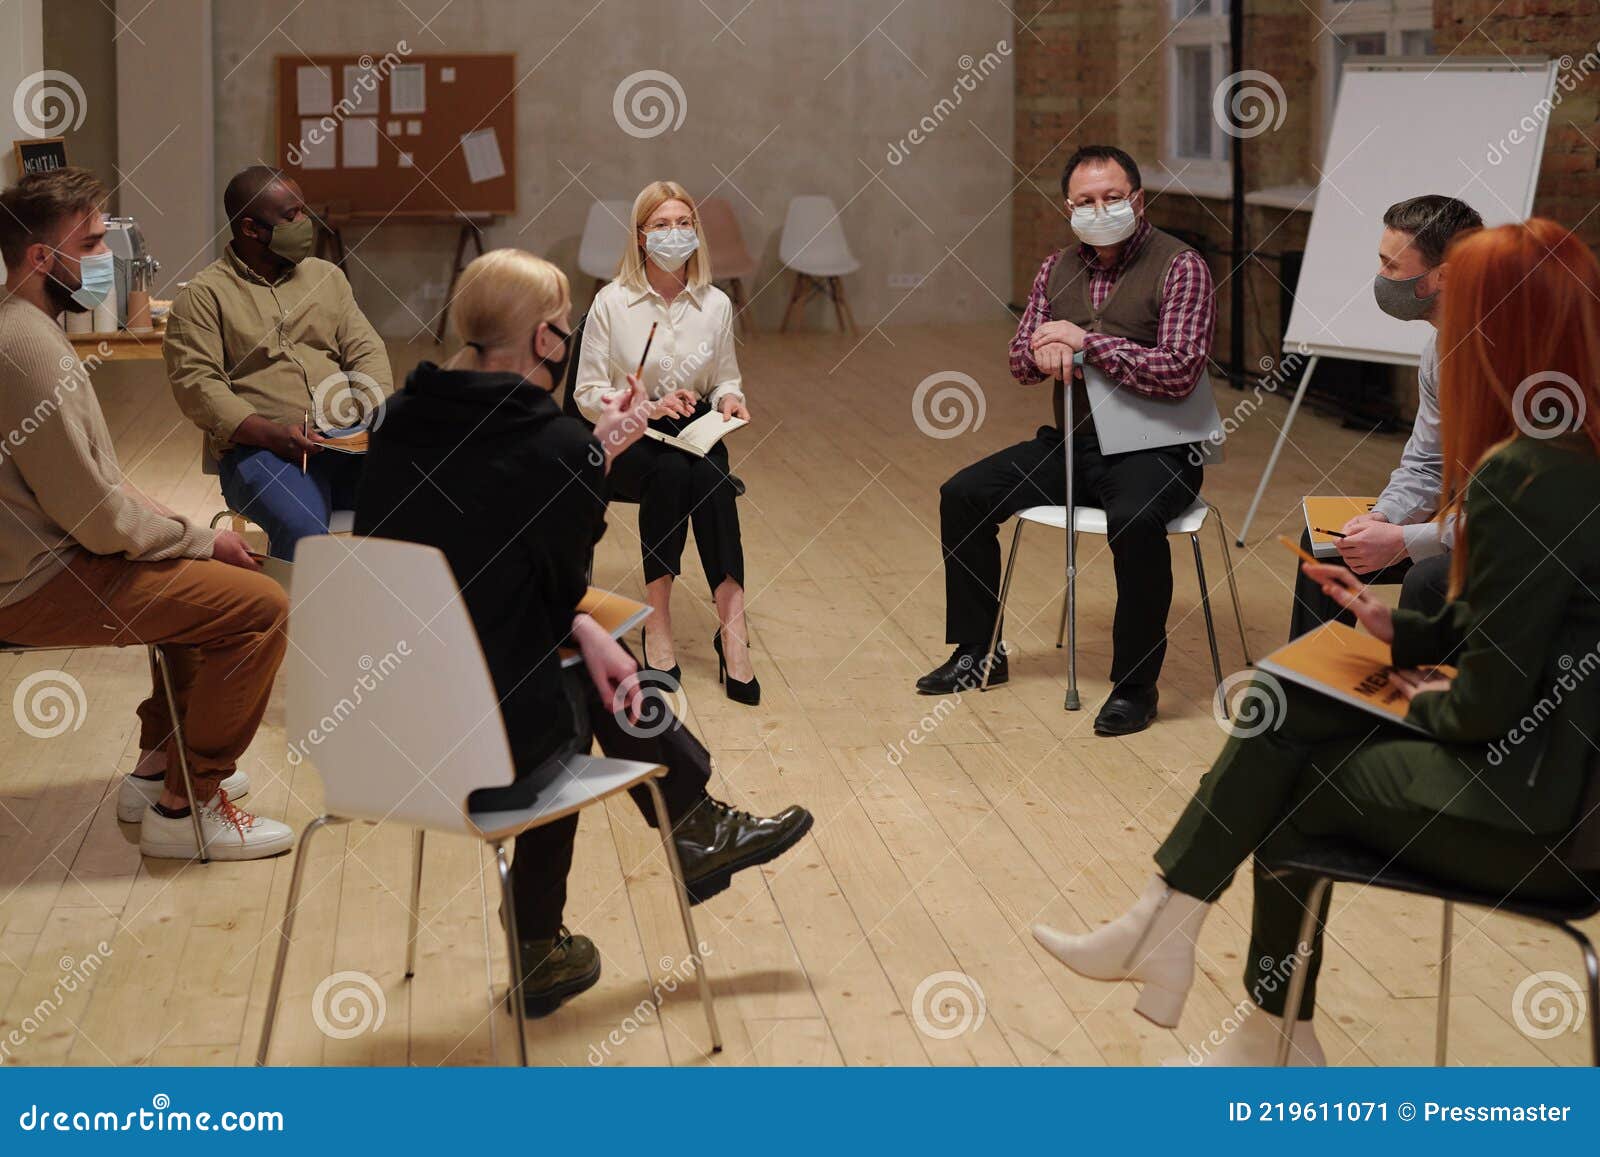 Group of People in Trouble Interacting during Session Stock Image ...